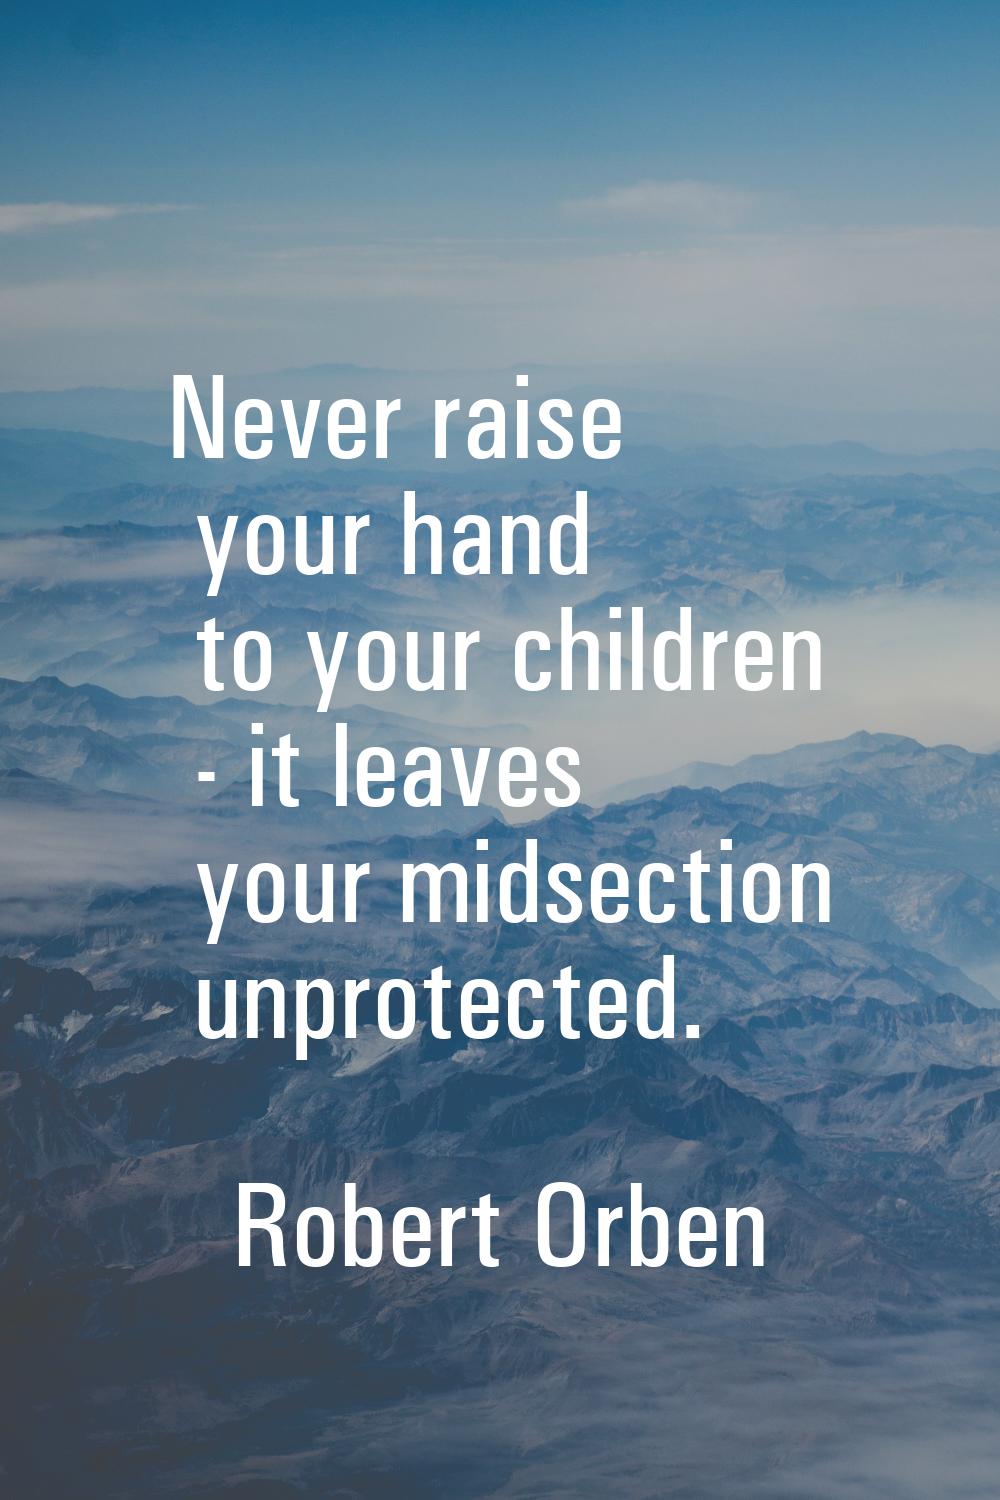 Never raise your hand to your children - it leaves your midsection unprotected.